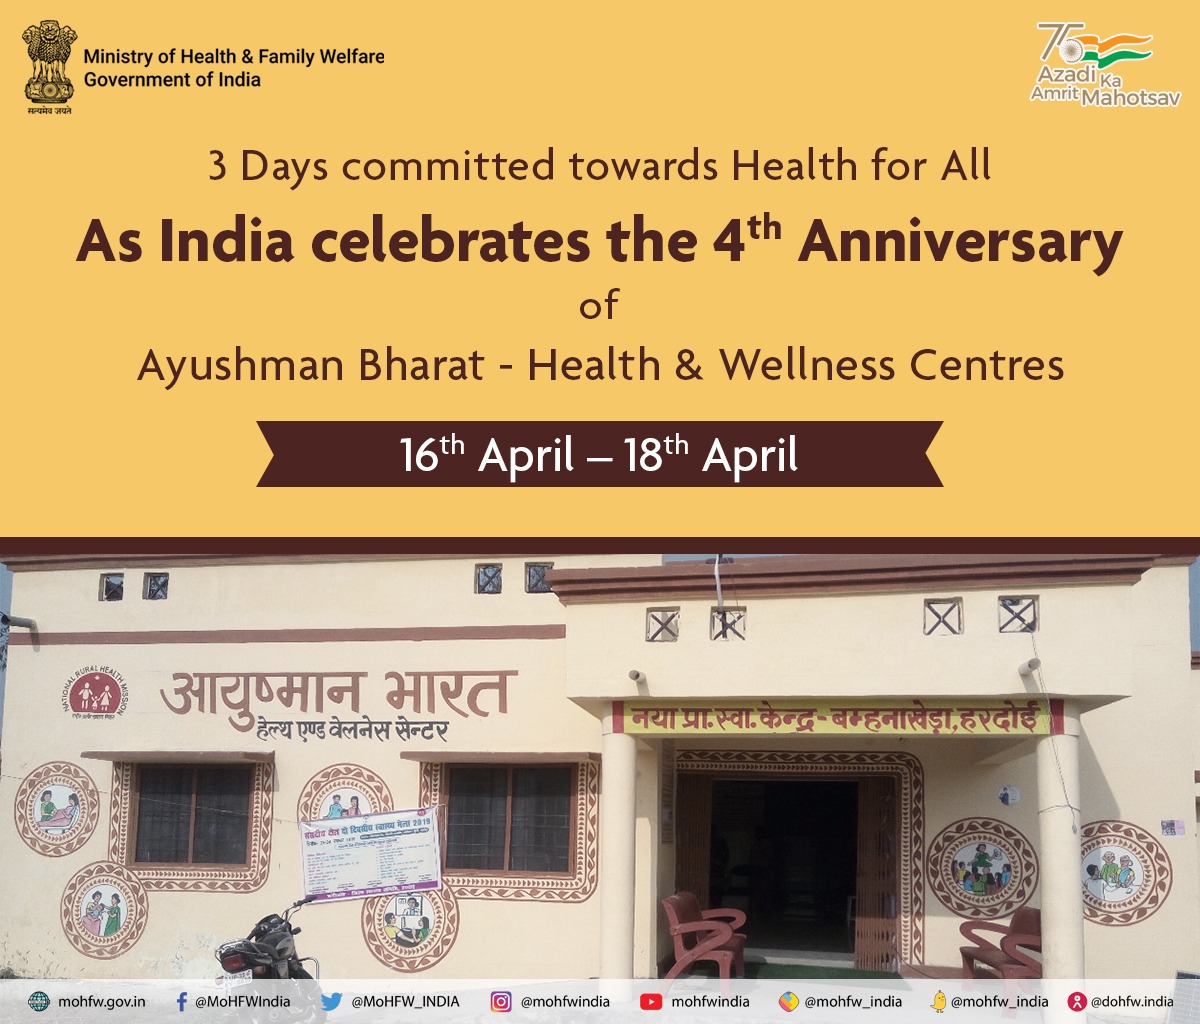 India Celebrates the 4th Anniversary of Ayushman Bharat -Health and Wellness Centres (16th April to 18th April)